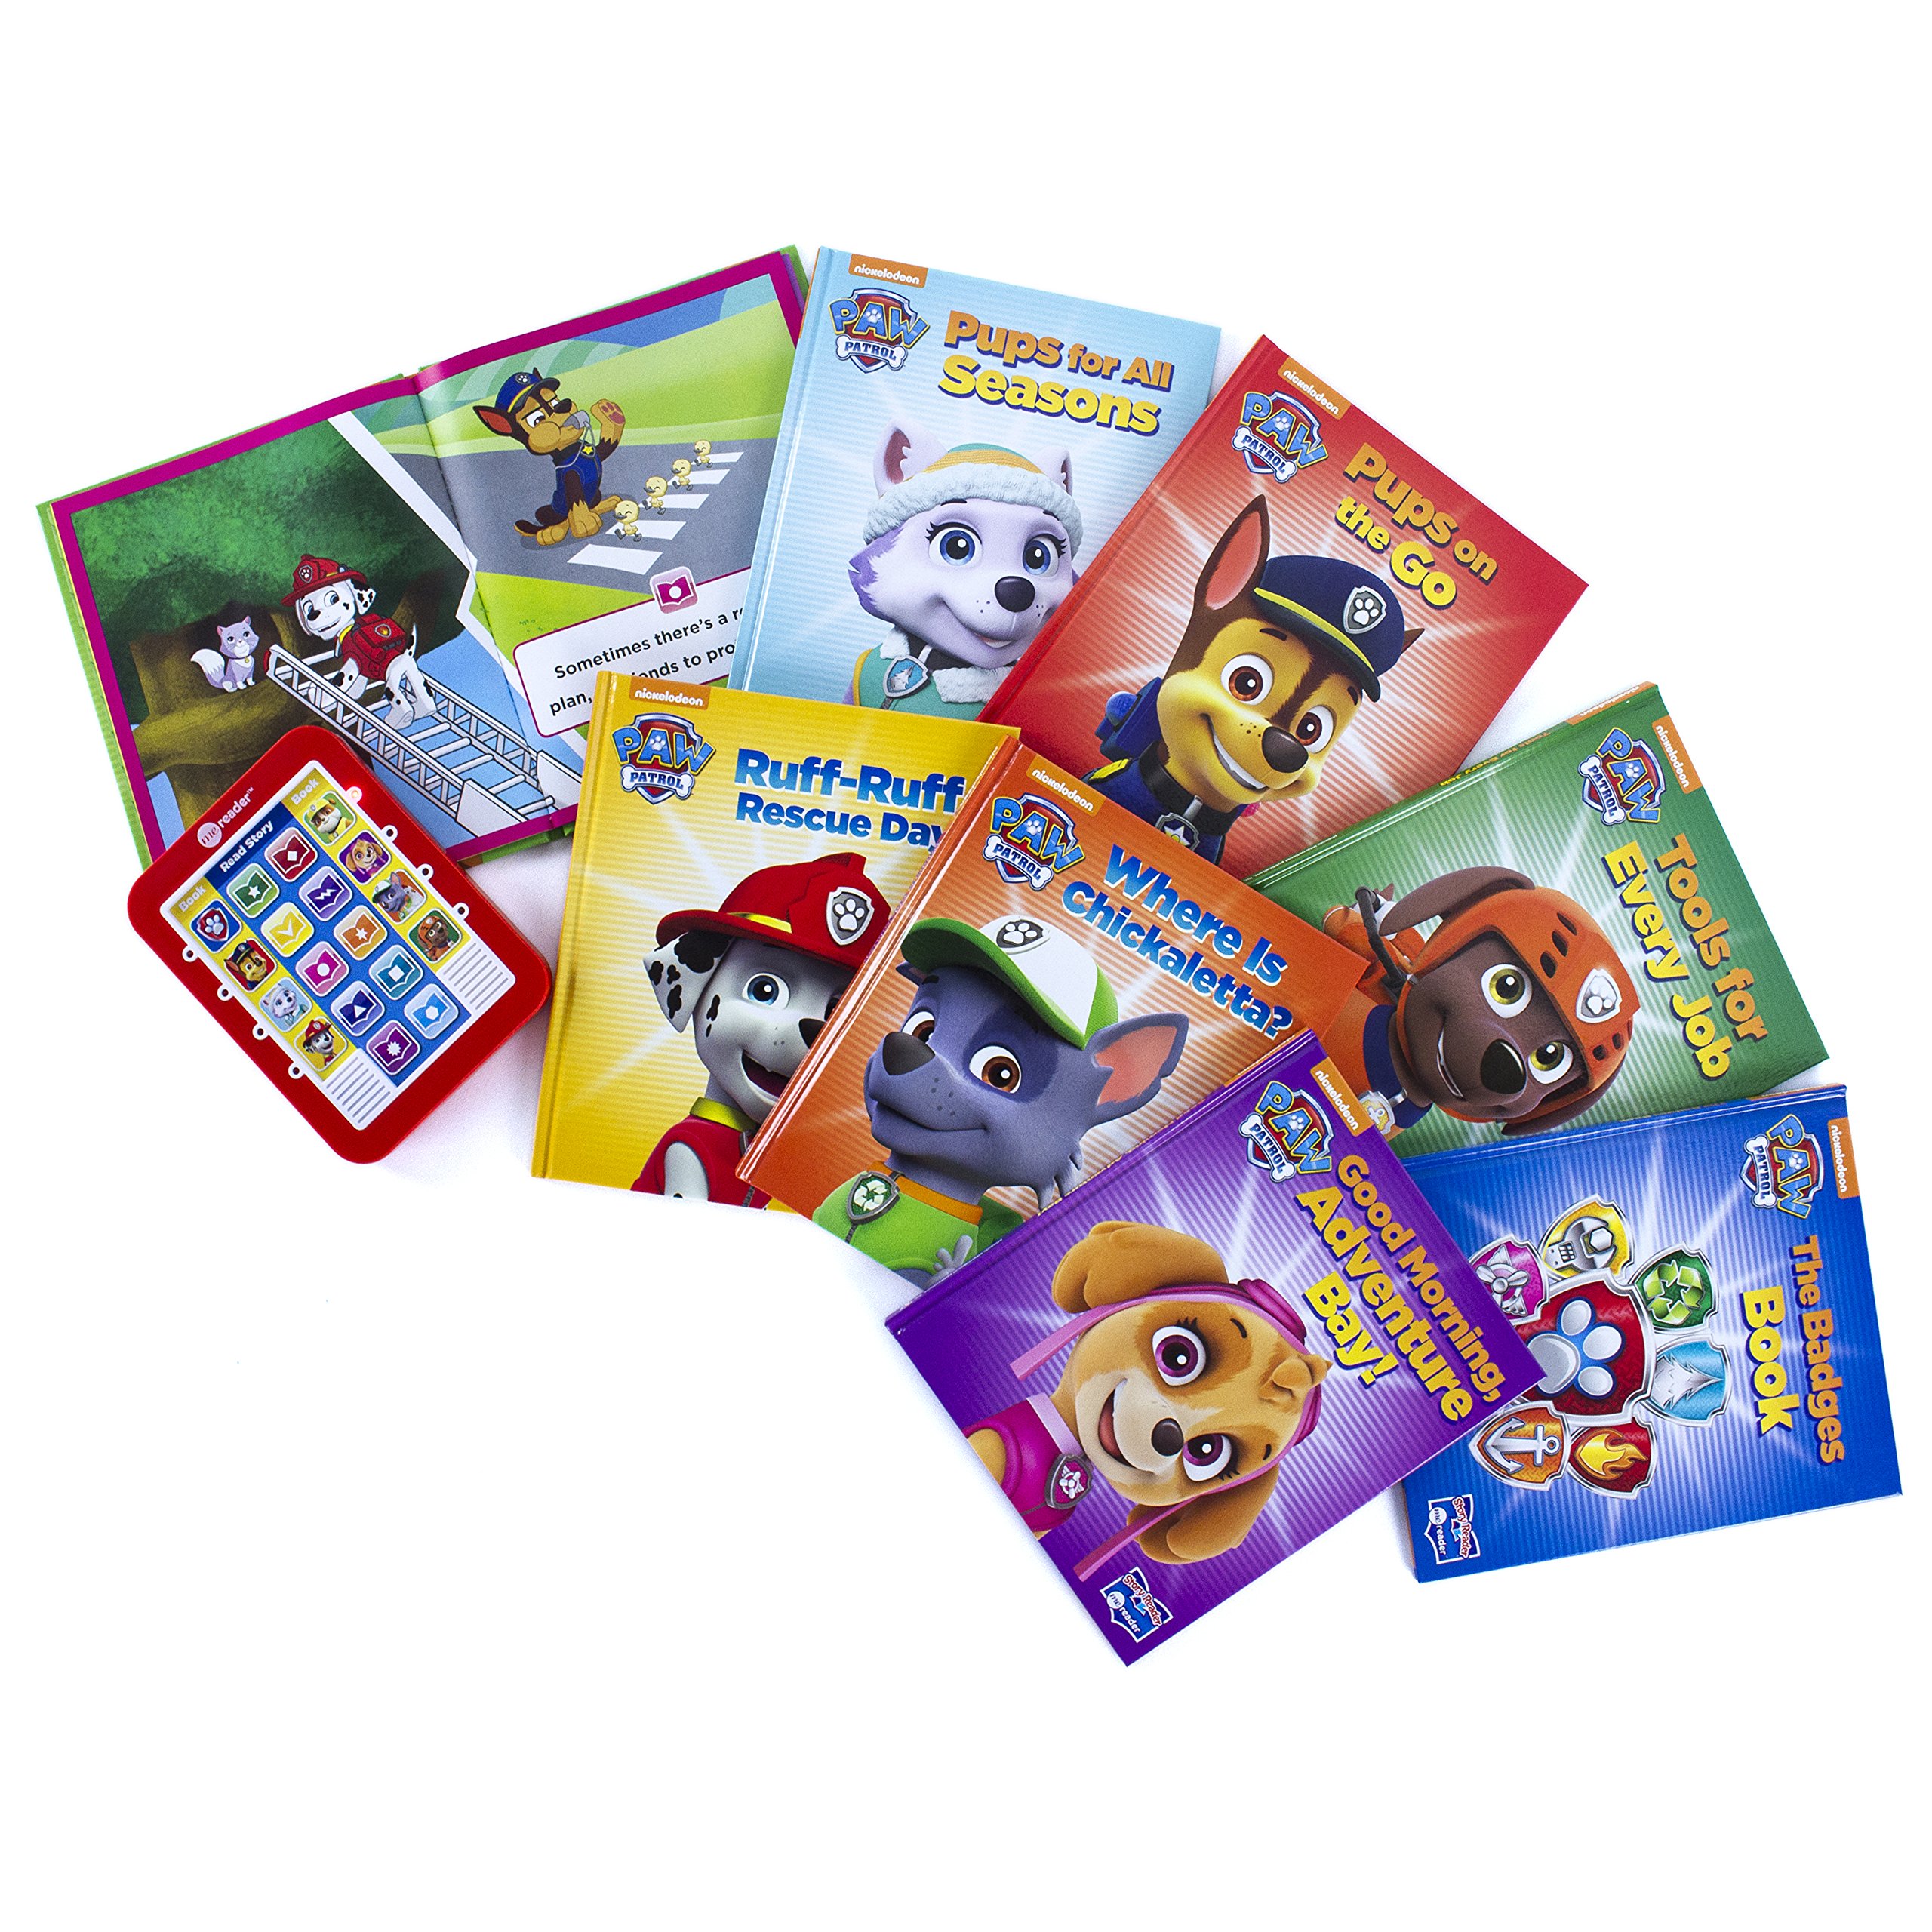 Nickelodeon Paw Patrol Chase, Skye, Marshall, and More! - Me Reader Electronic Reader and 8 Sound Book Library - PI Kids